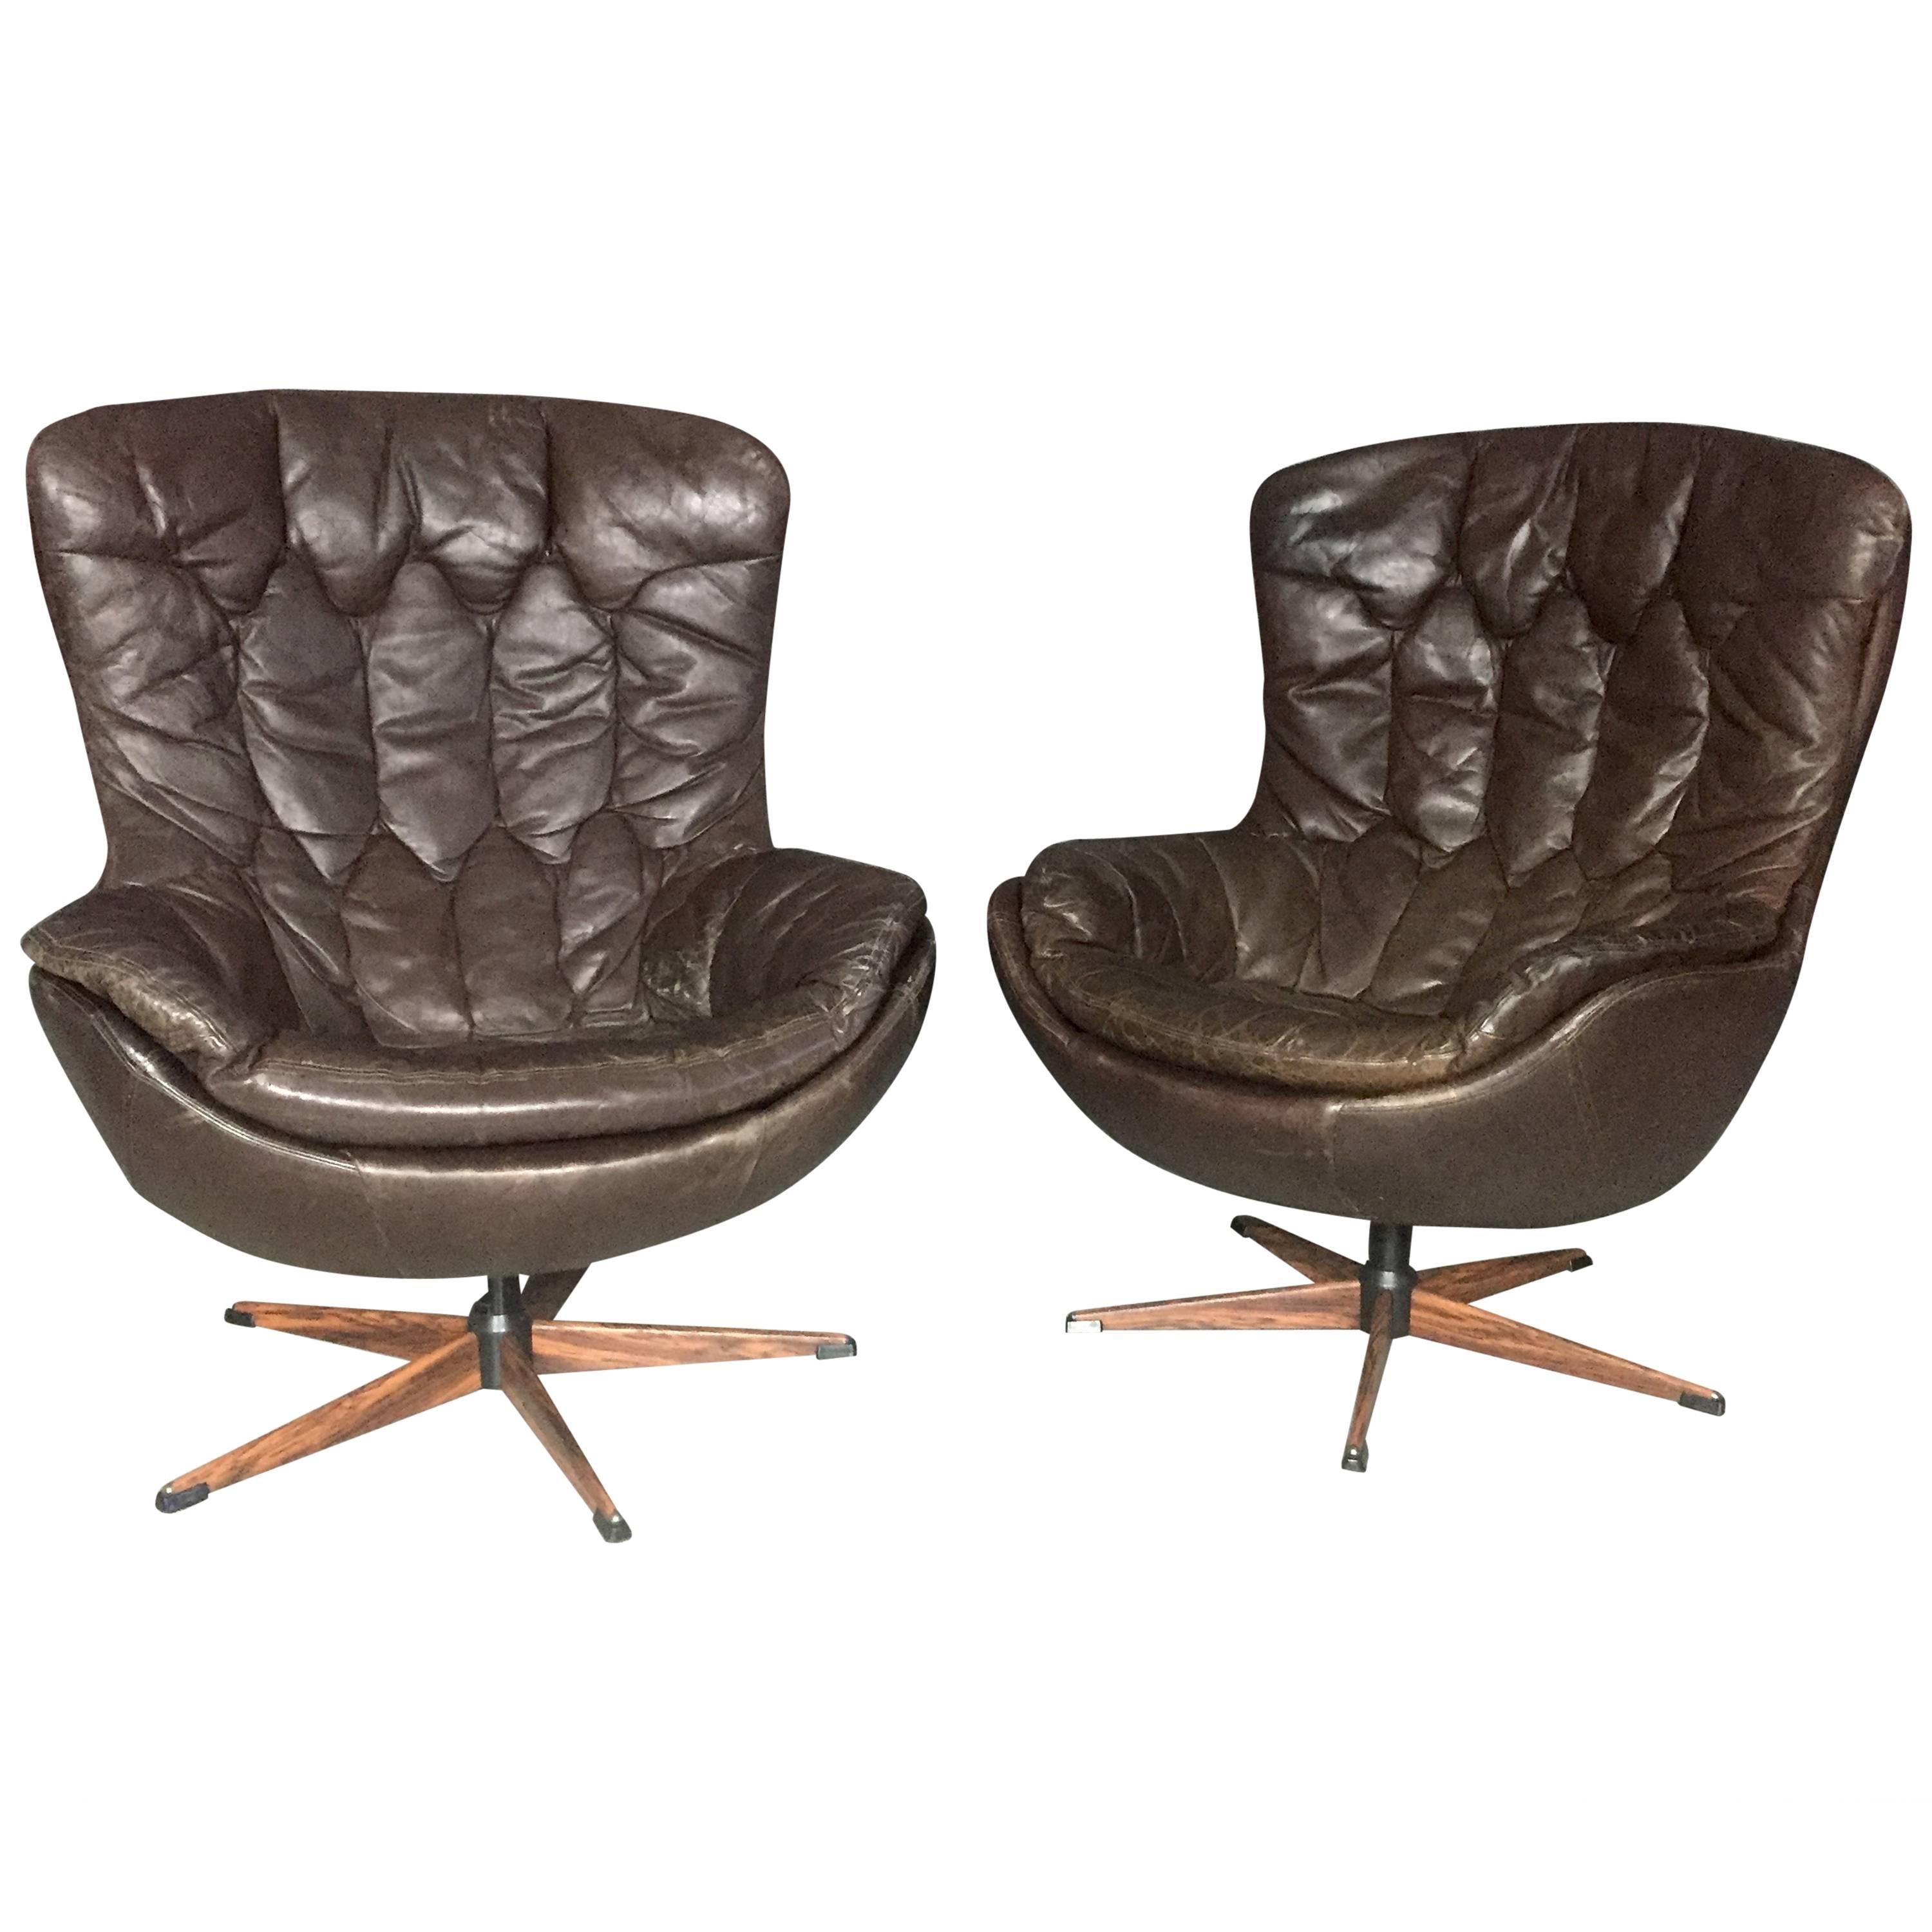 H.W. Klein Pair of Sculpted Tufted Leather Swivel Chairs, Denmark, 1970